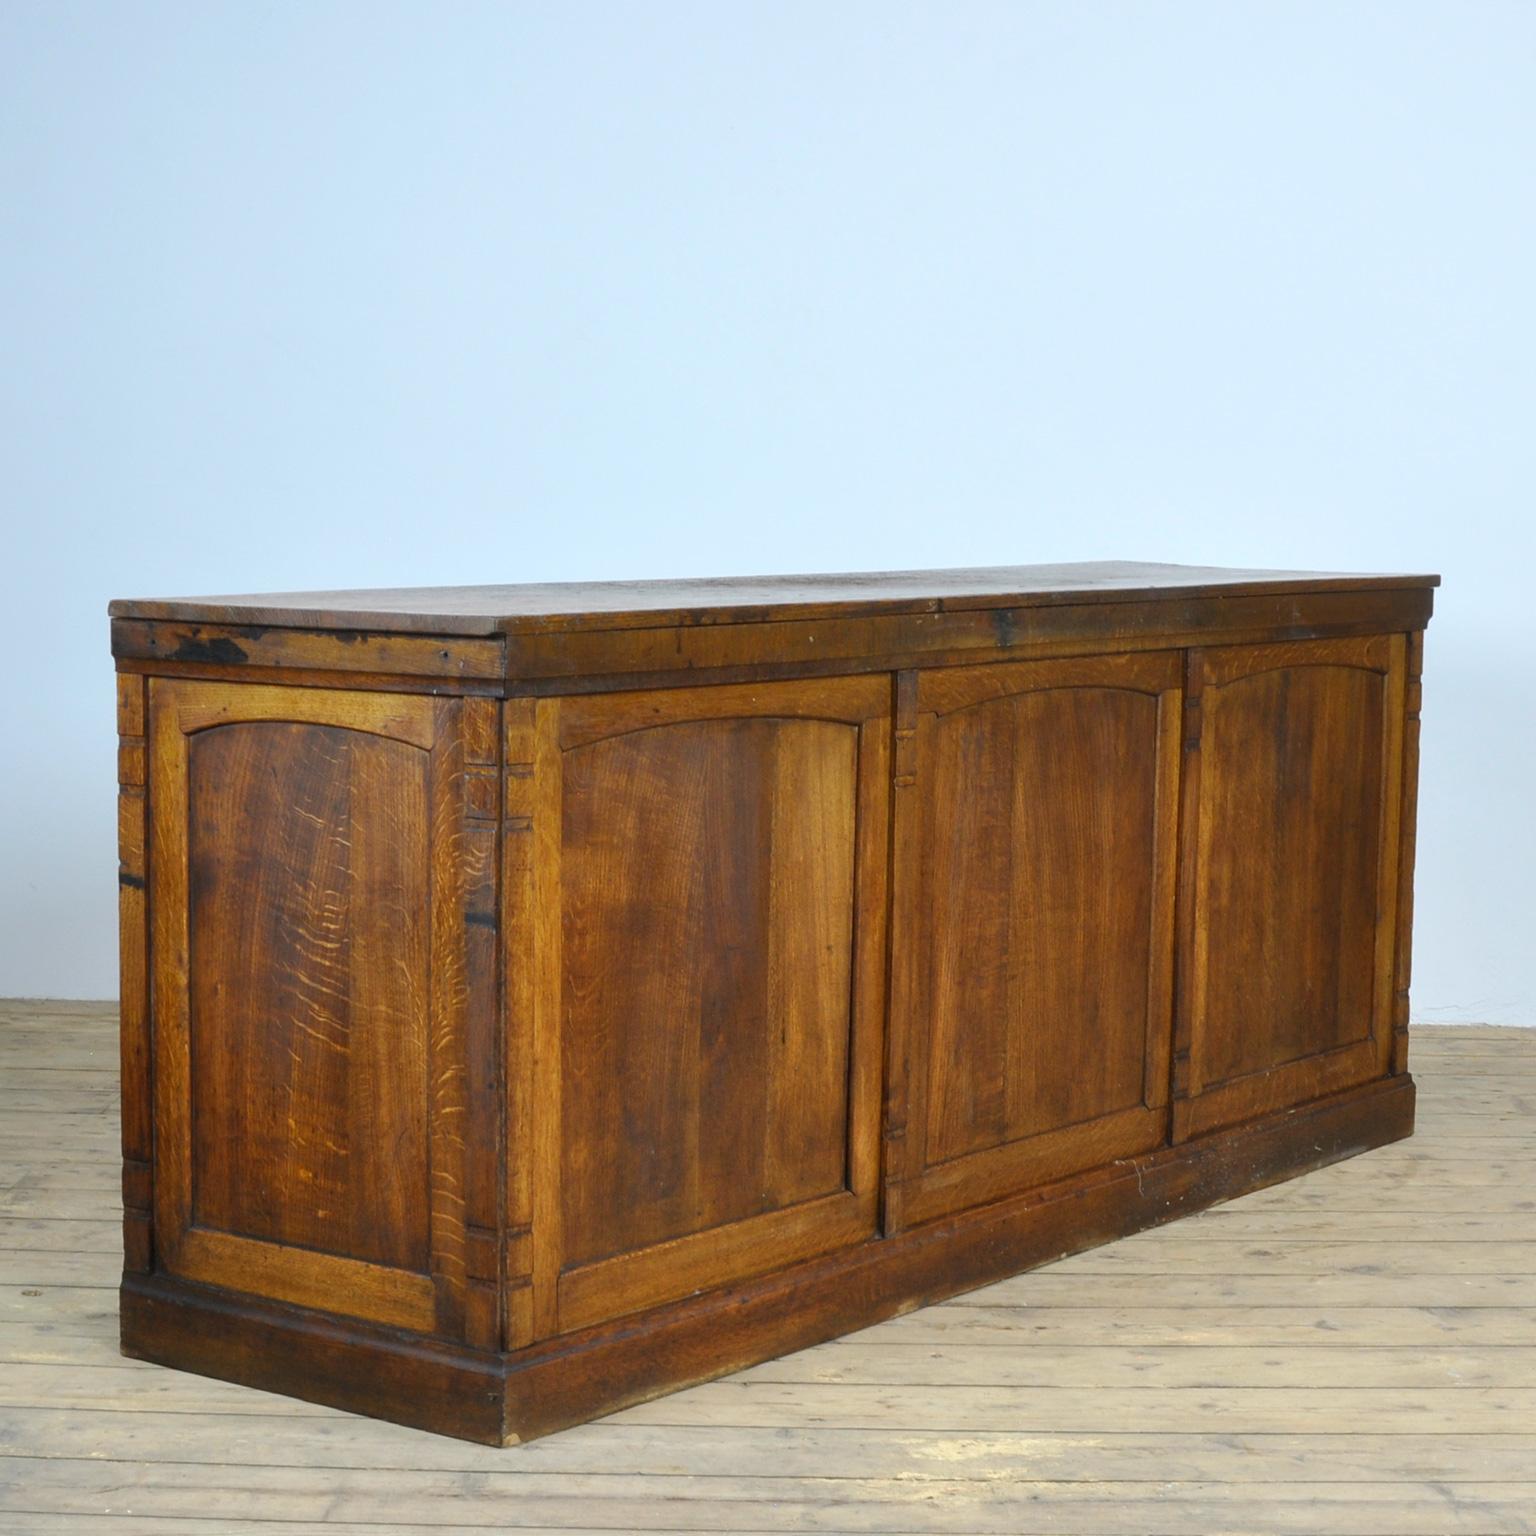 French shopcounter made of oak with 6 pine drawers.